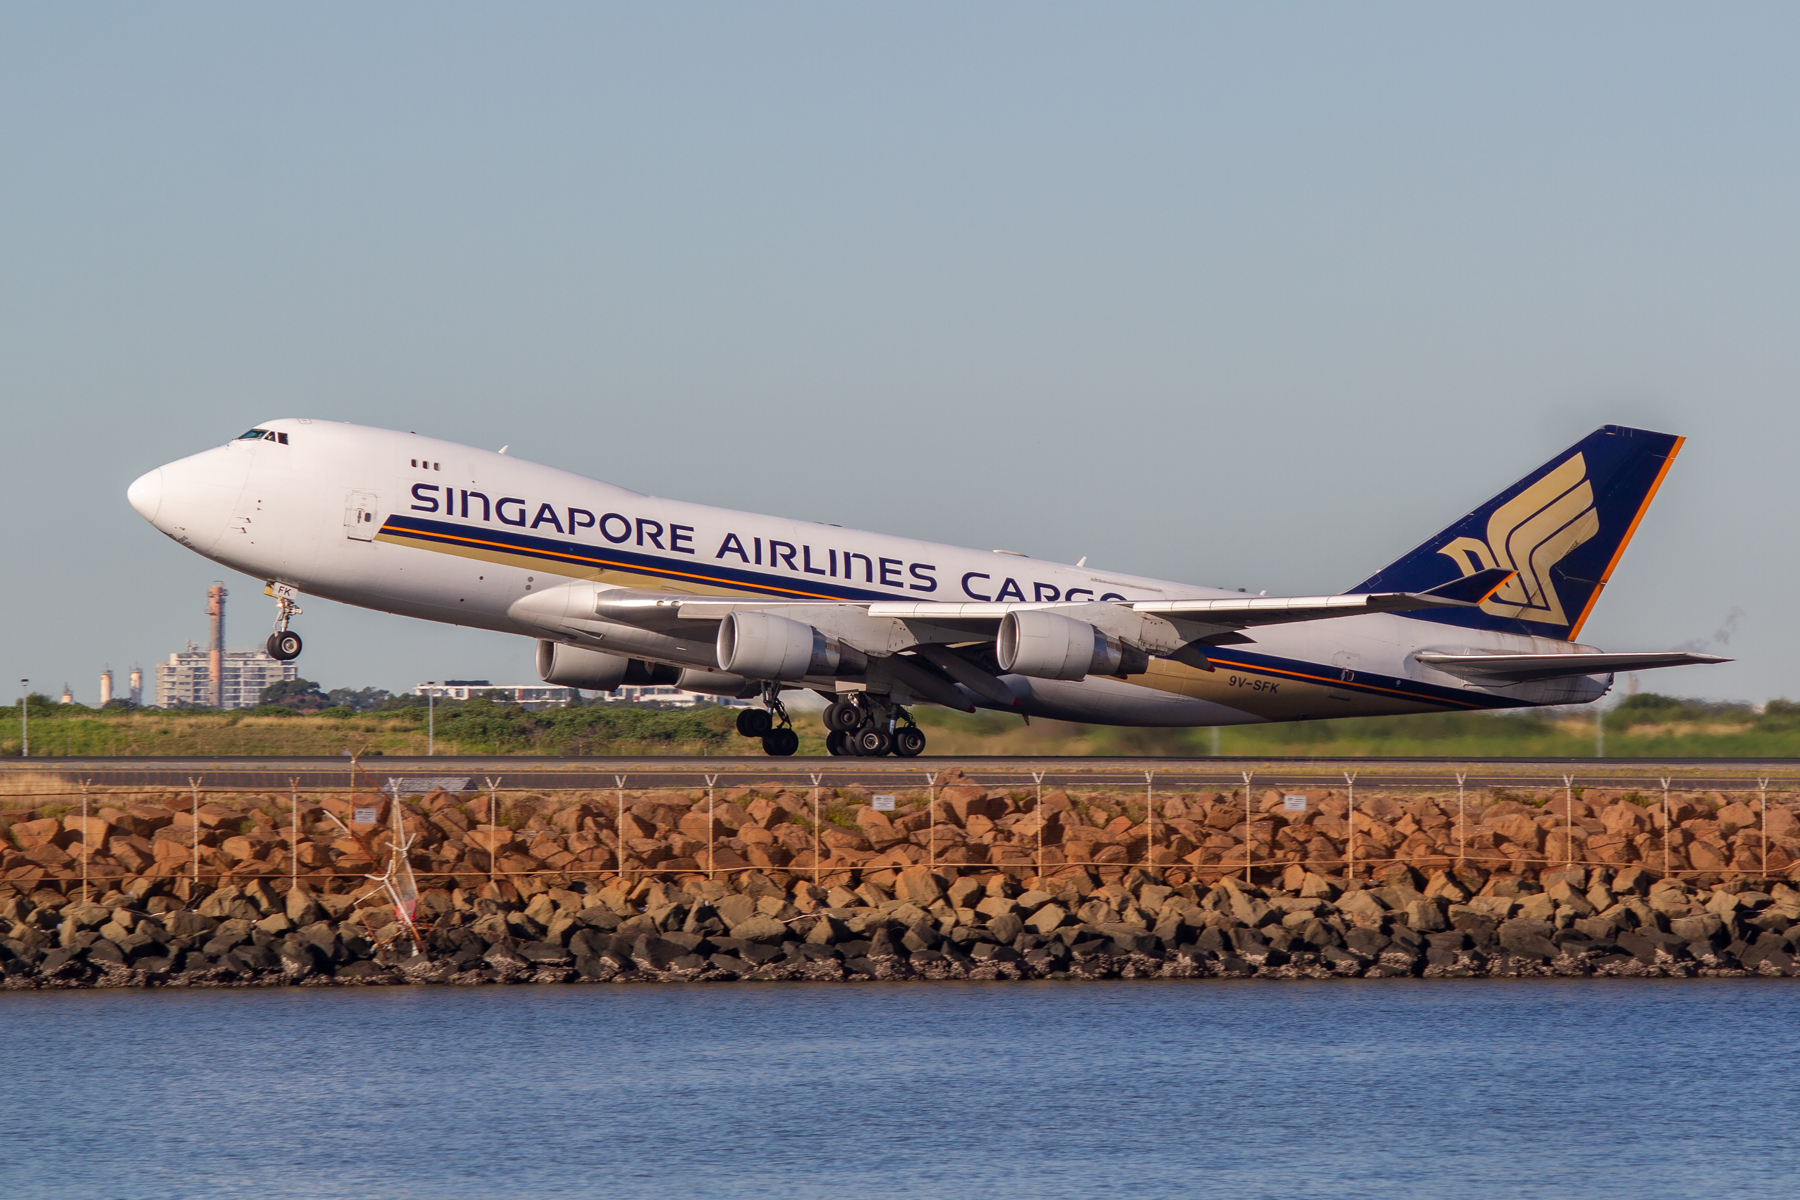 Singapore Airlines Boeing 747-400F 9V-SFK at Kingsford Smith